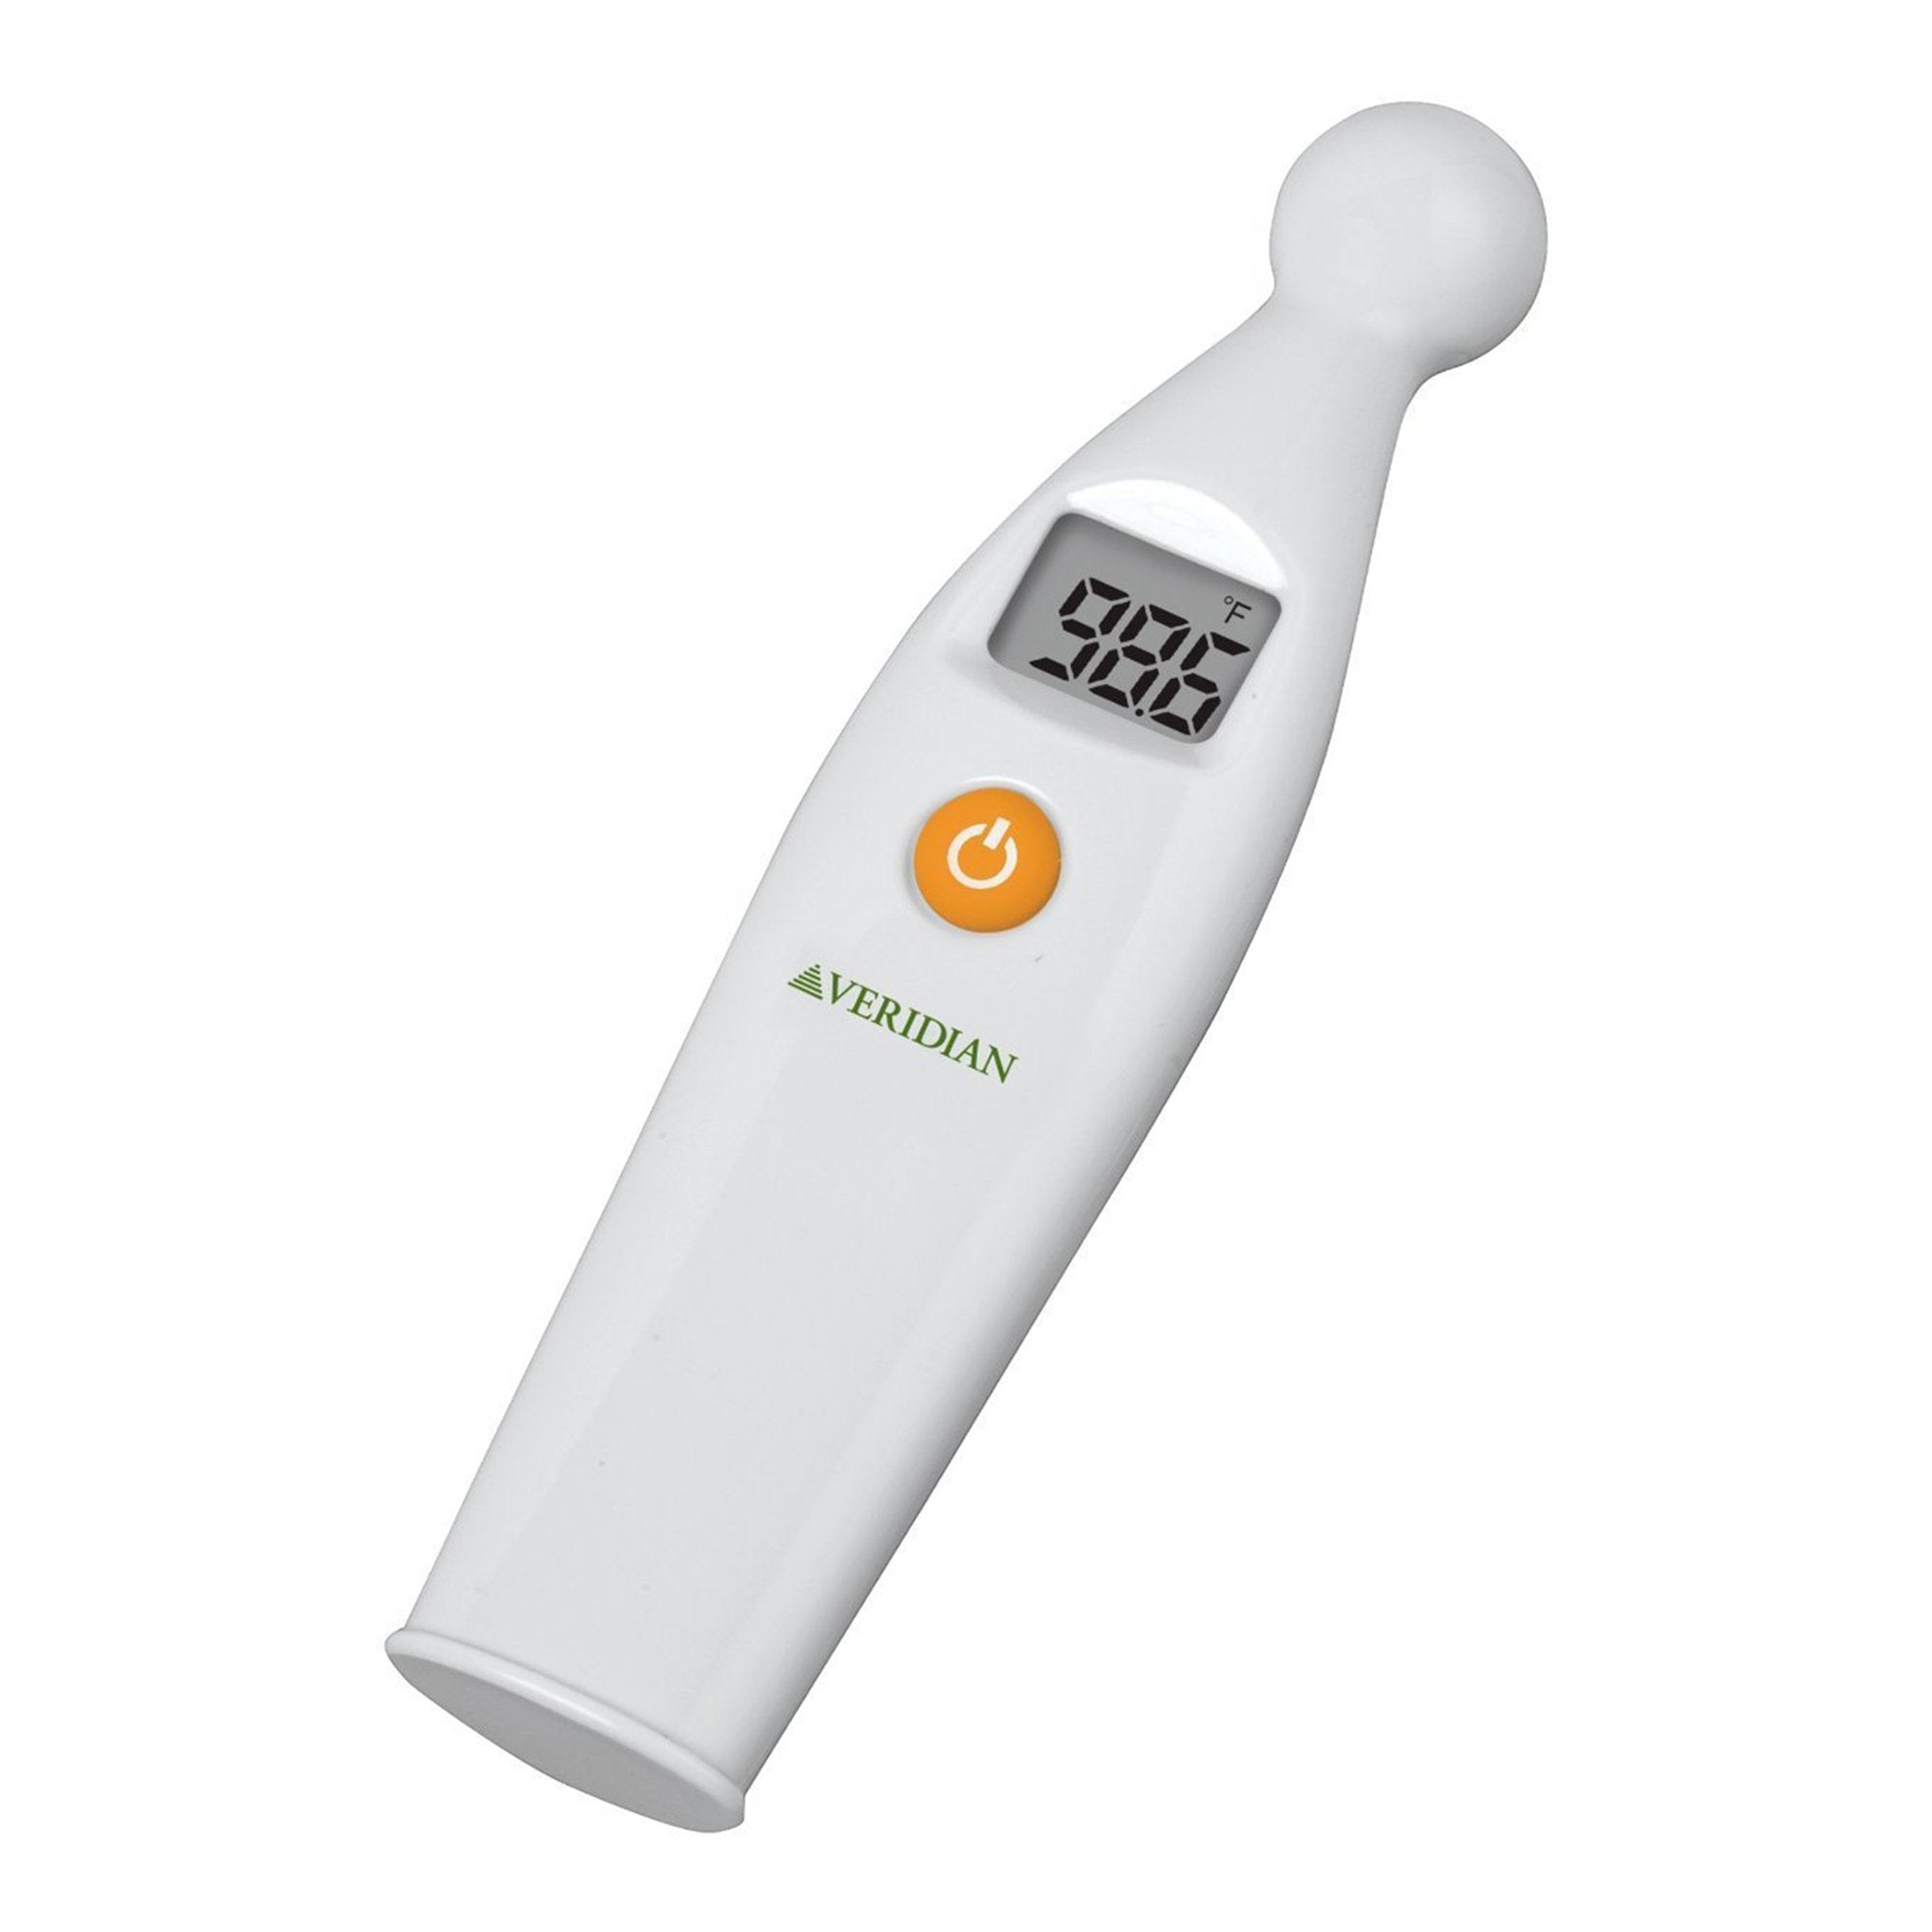 THERMOMETER, TEMPLE 6SECOND TOUCH MINI